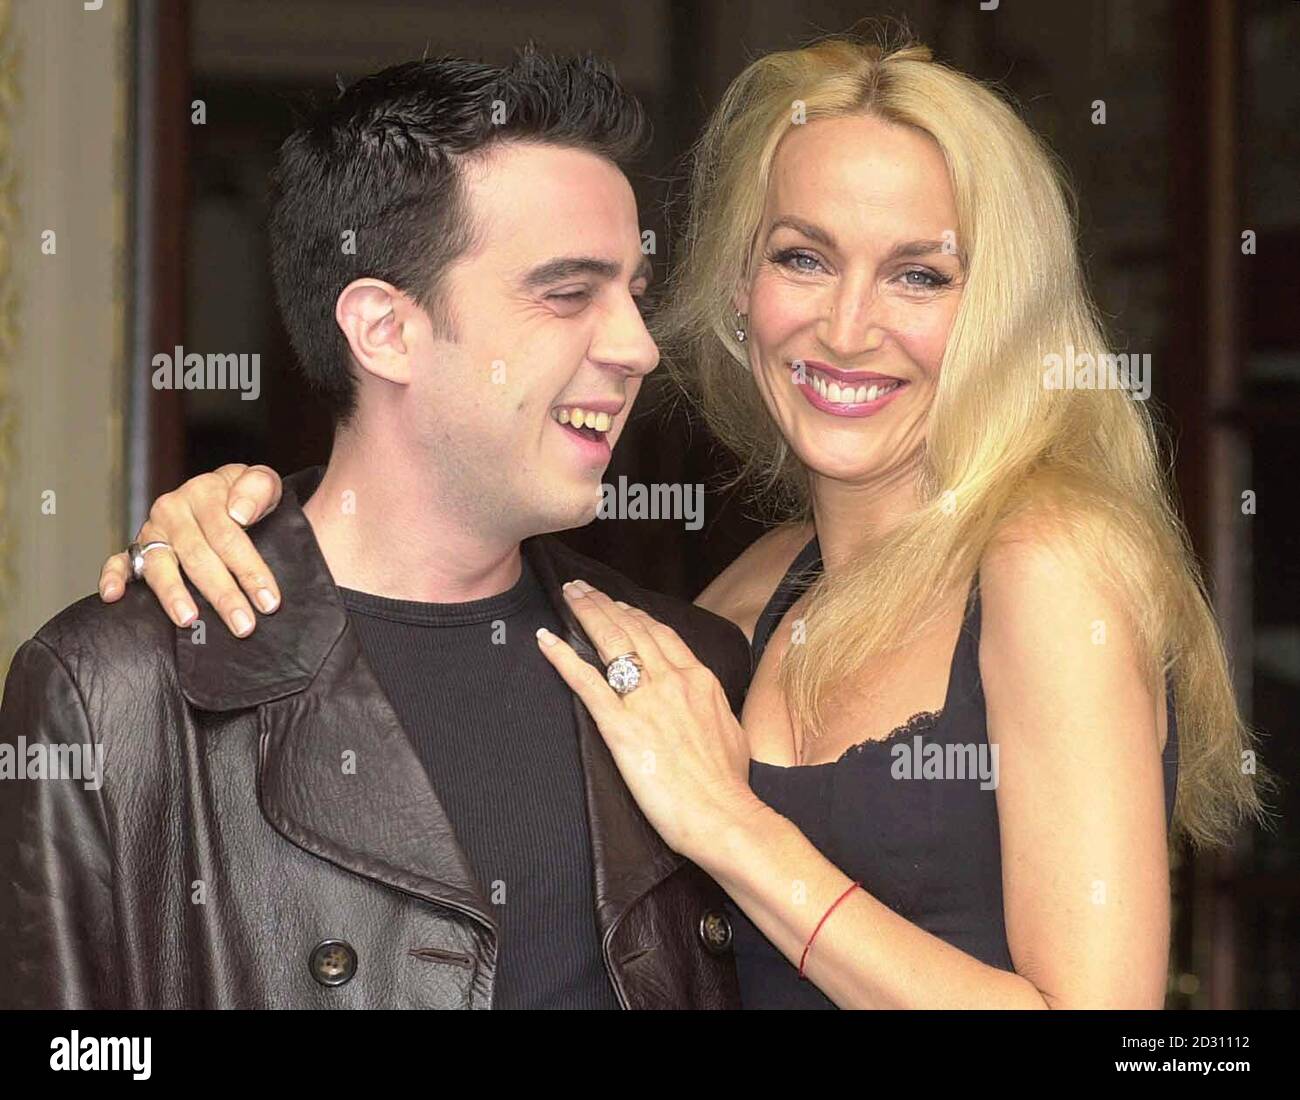 Former super model turned actress Jerry Hall posing with Josh Cohen at the Gielgud Theatre in London, where they will star in the stage adaptation of 'The Graduate' as 'Mrs. Robinson' and 'Benjamin'.   * Actress Kathleen Turner and Matthew Rhys currently star in the lead roles of the West end production but their contracts terminate by the end of July. Stock Photo